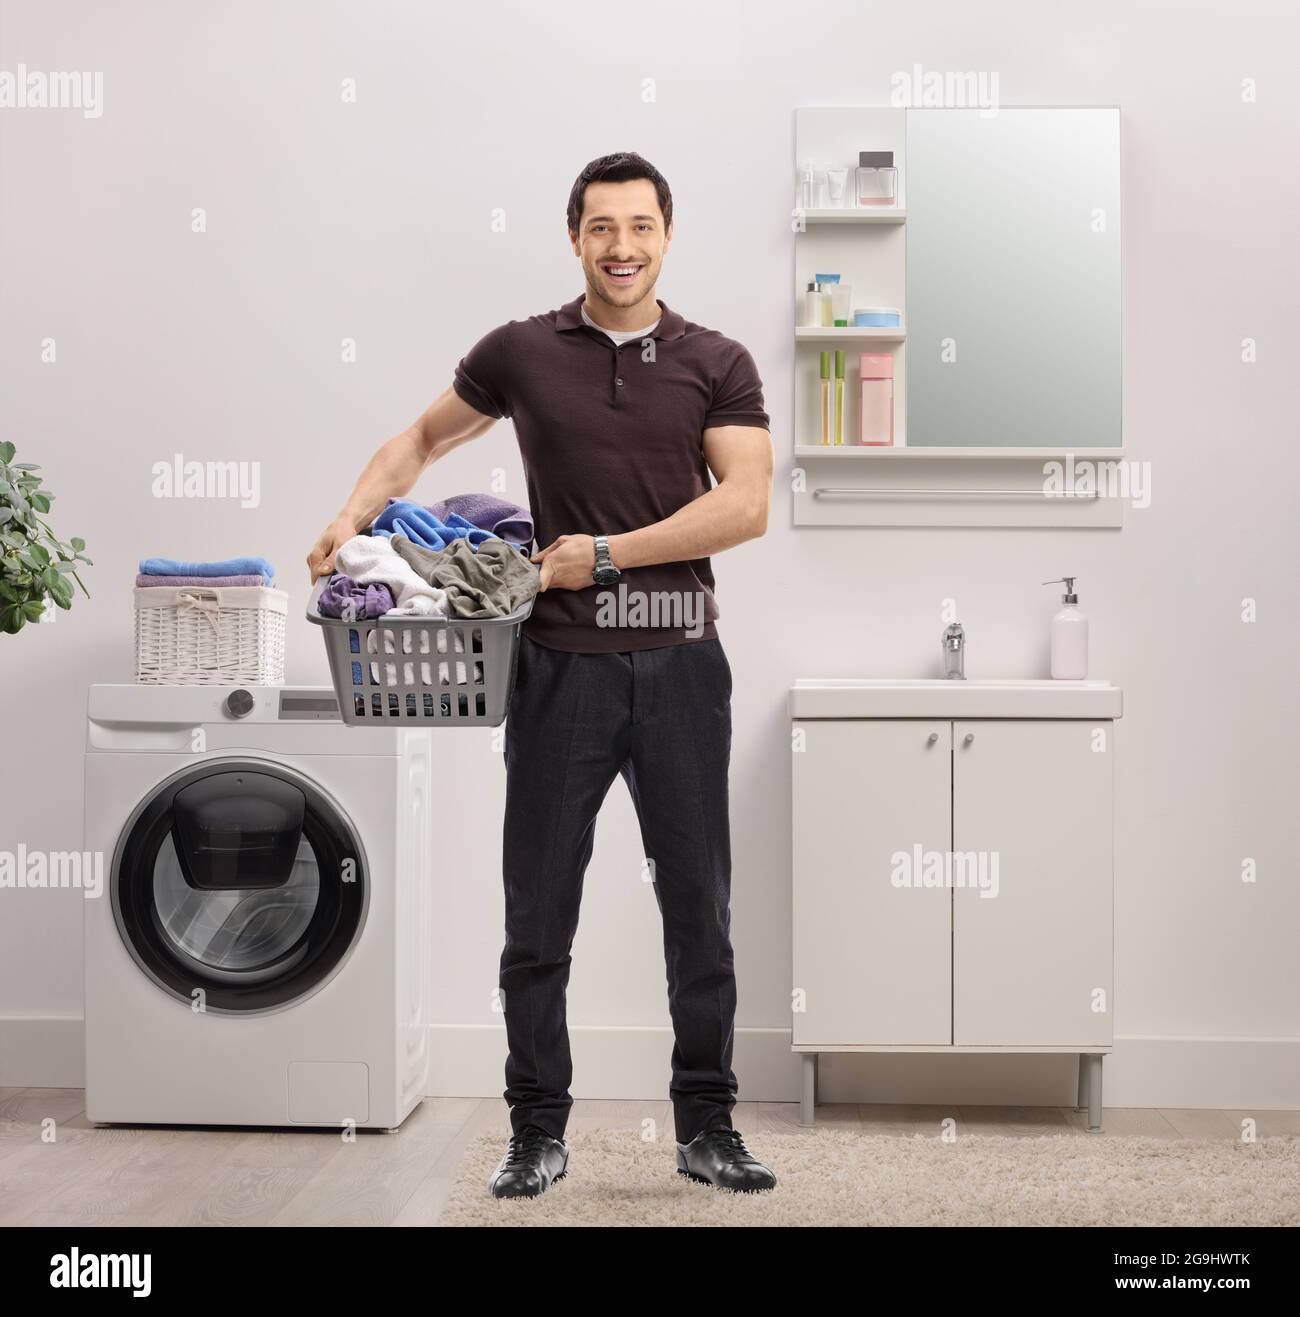 Young man with a laundry basket full of clothes standing in a bathroom Stock Photo